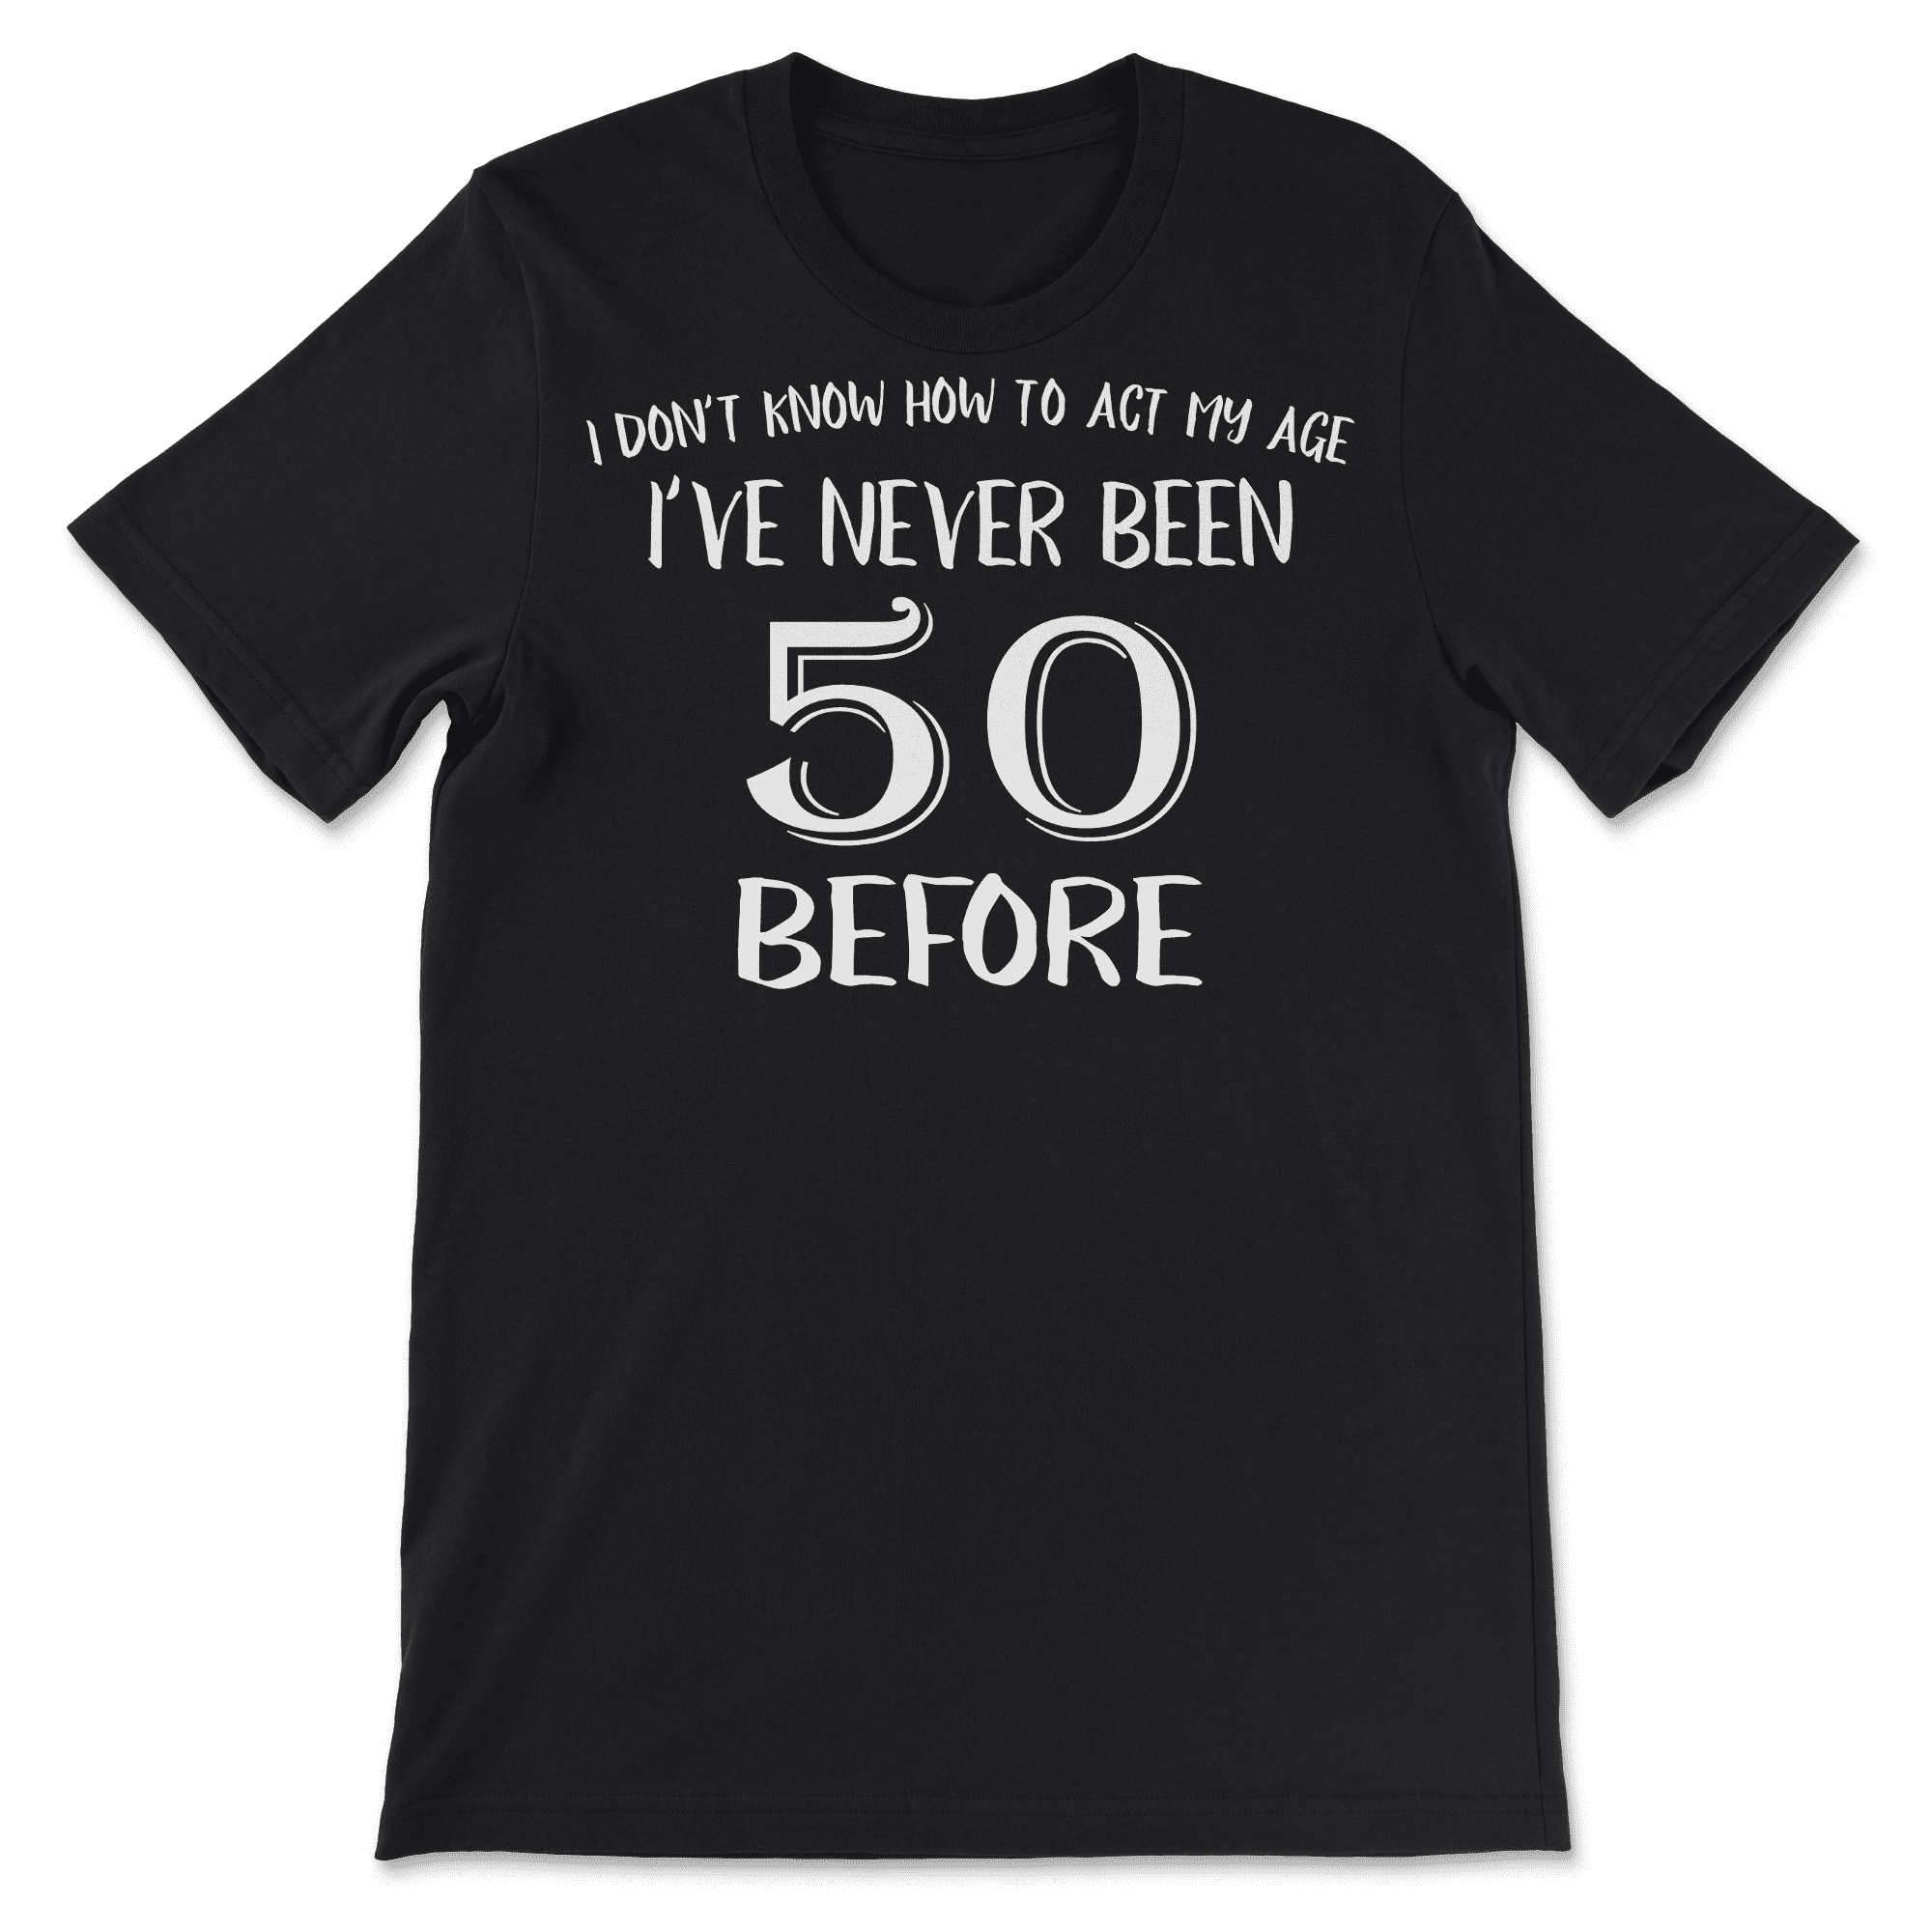 Funny 50th Birthday Shirt for 50 Years Old Men and Women! - Walmart.com